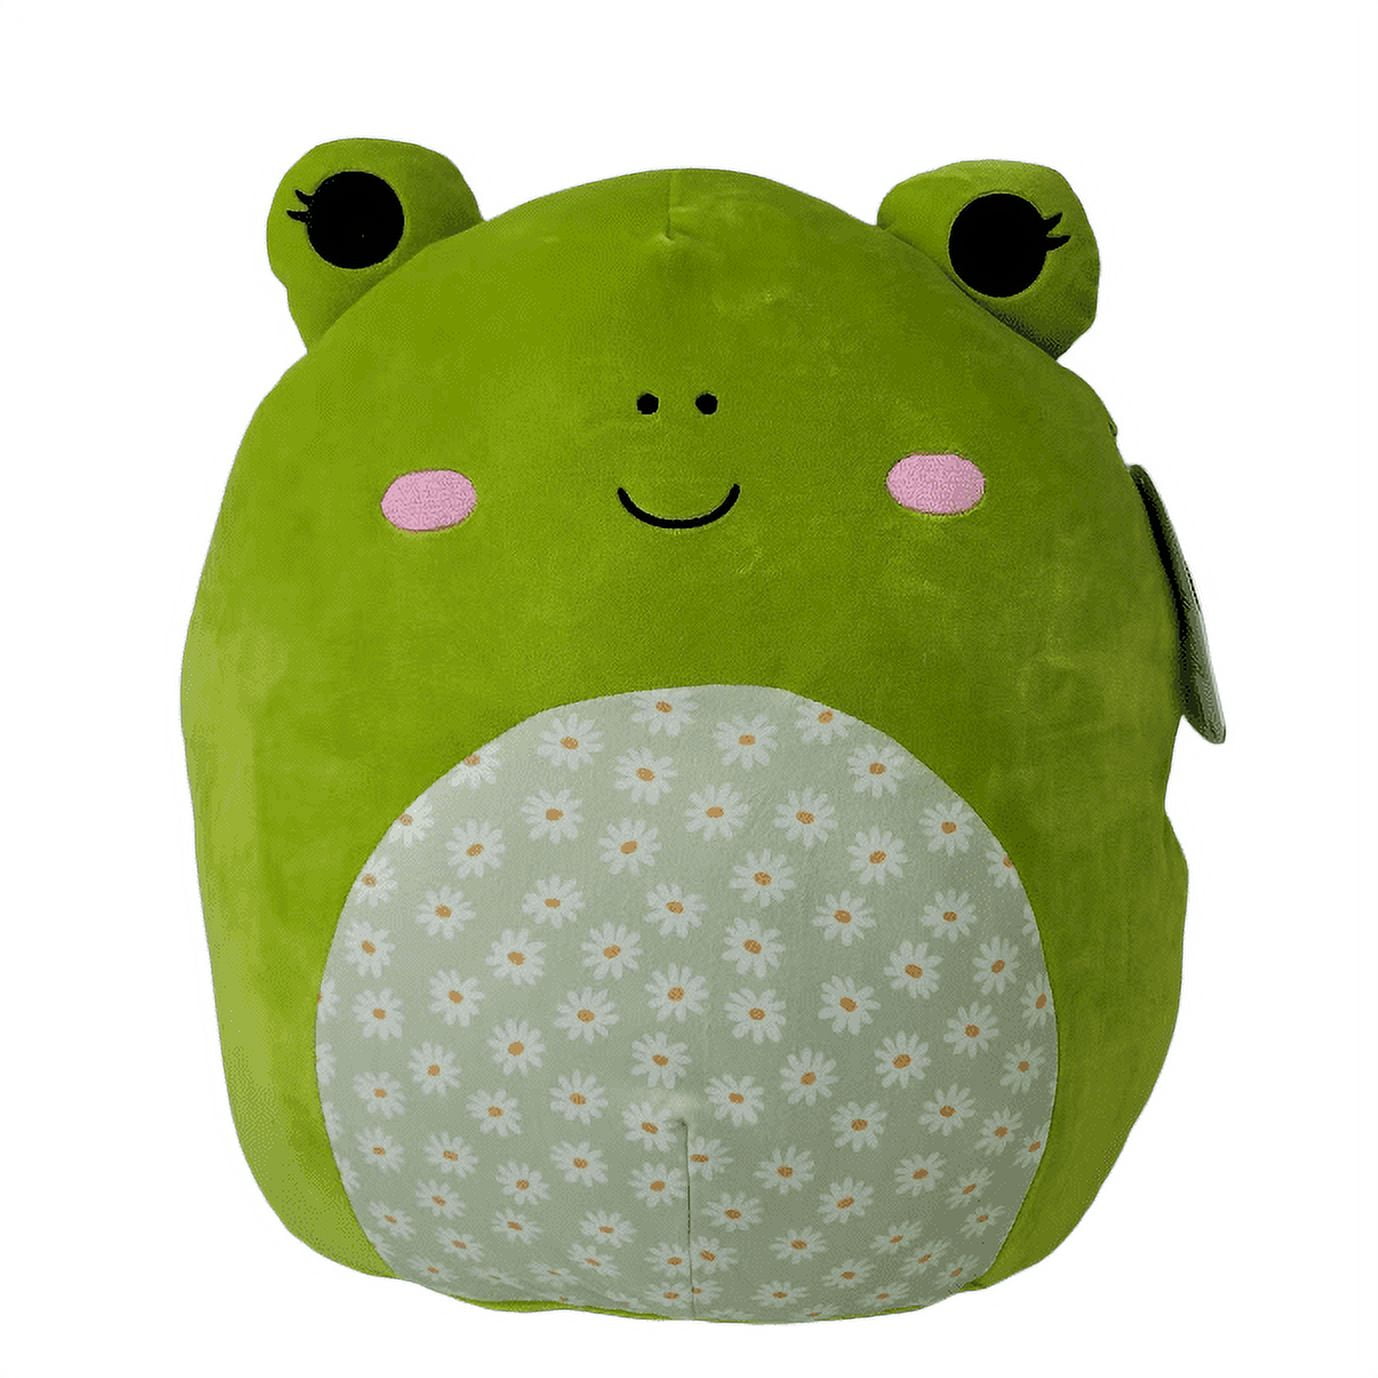 Squishmallows Official Kellytoys Plush 16 Inch Wendy the Frog Floral Belly  Ultimate Soft Stuffed Toy